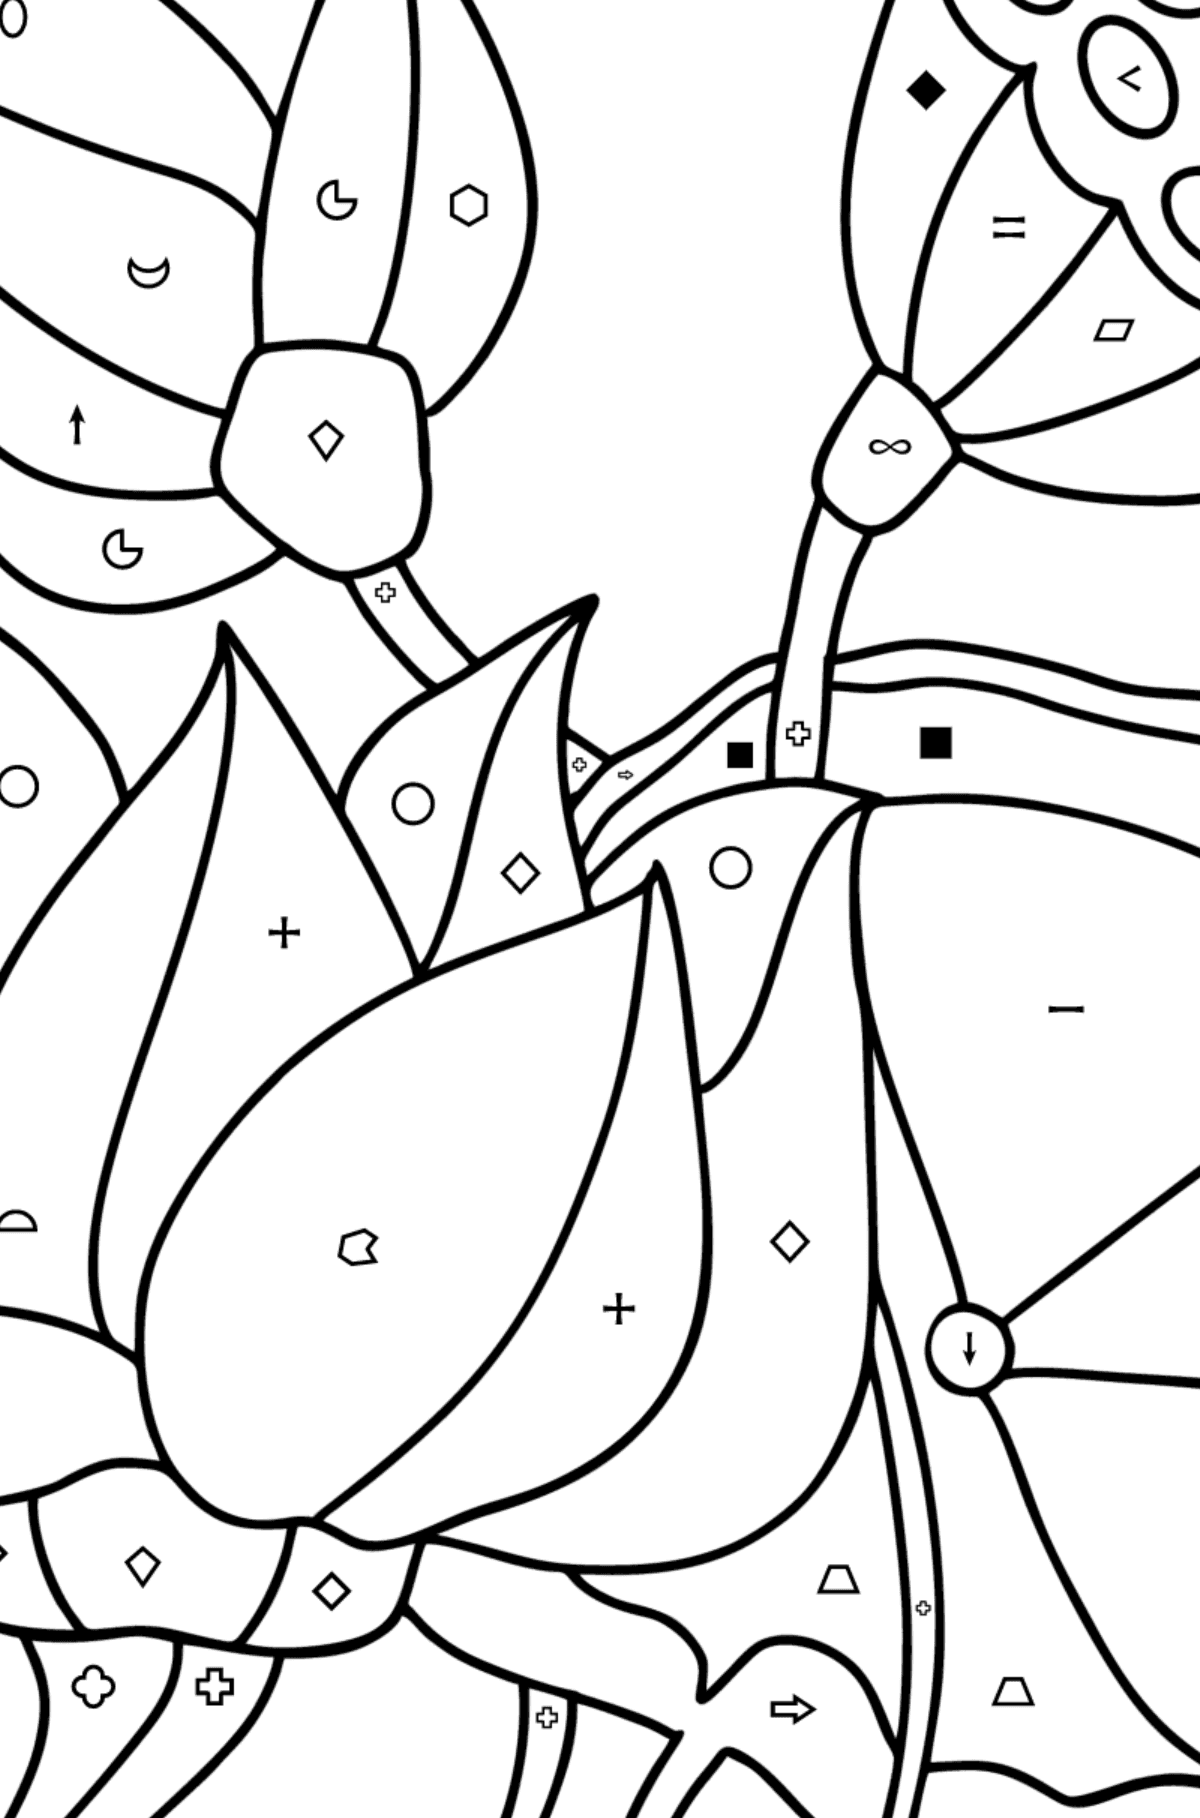 Lotus coloring page - Coloring by Symbols and Geometric Shapes for Kids